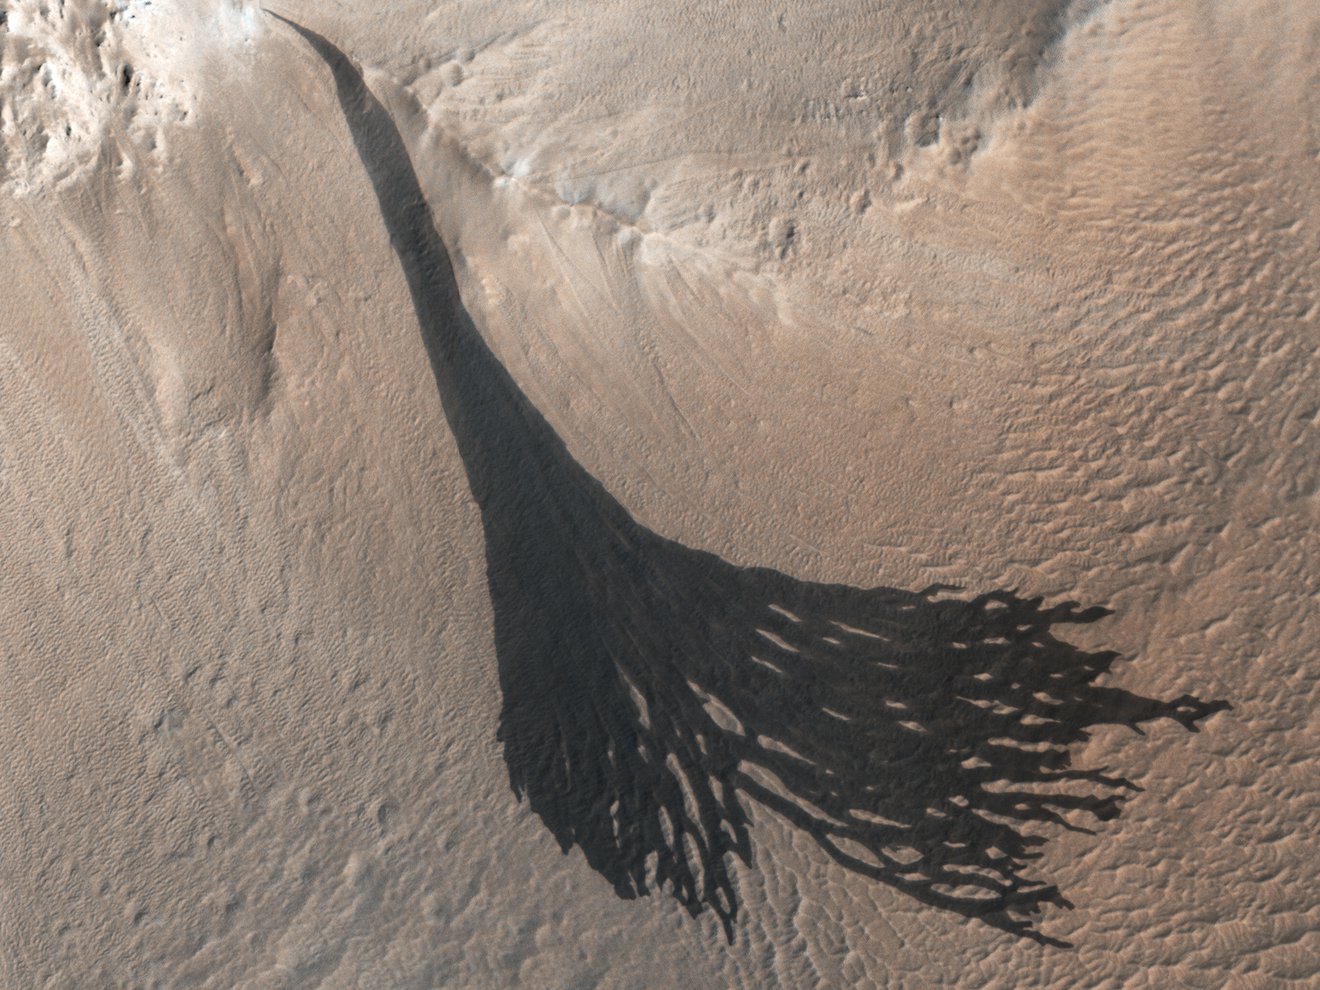 This is a Dust Avalanche on Mars